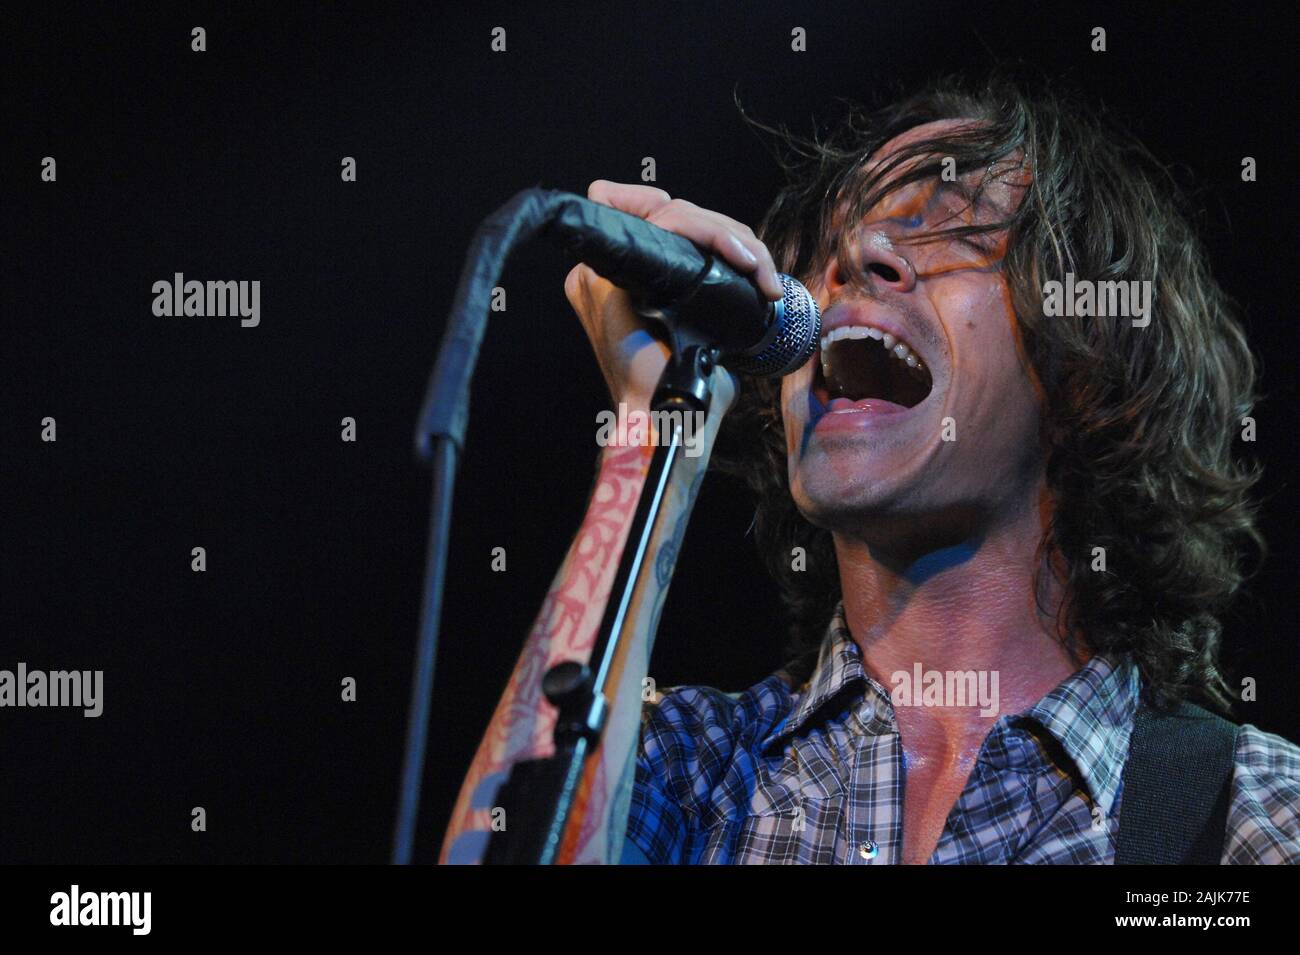 Milan  Italy, 16 September 2007 ,Live concert of Incubus at the Alcatraz : The singer of Incubus, Brandon Boyd, during the concert Stock Photo